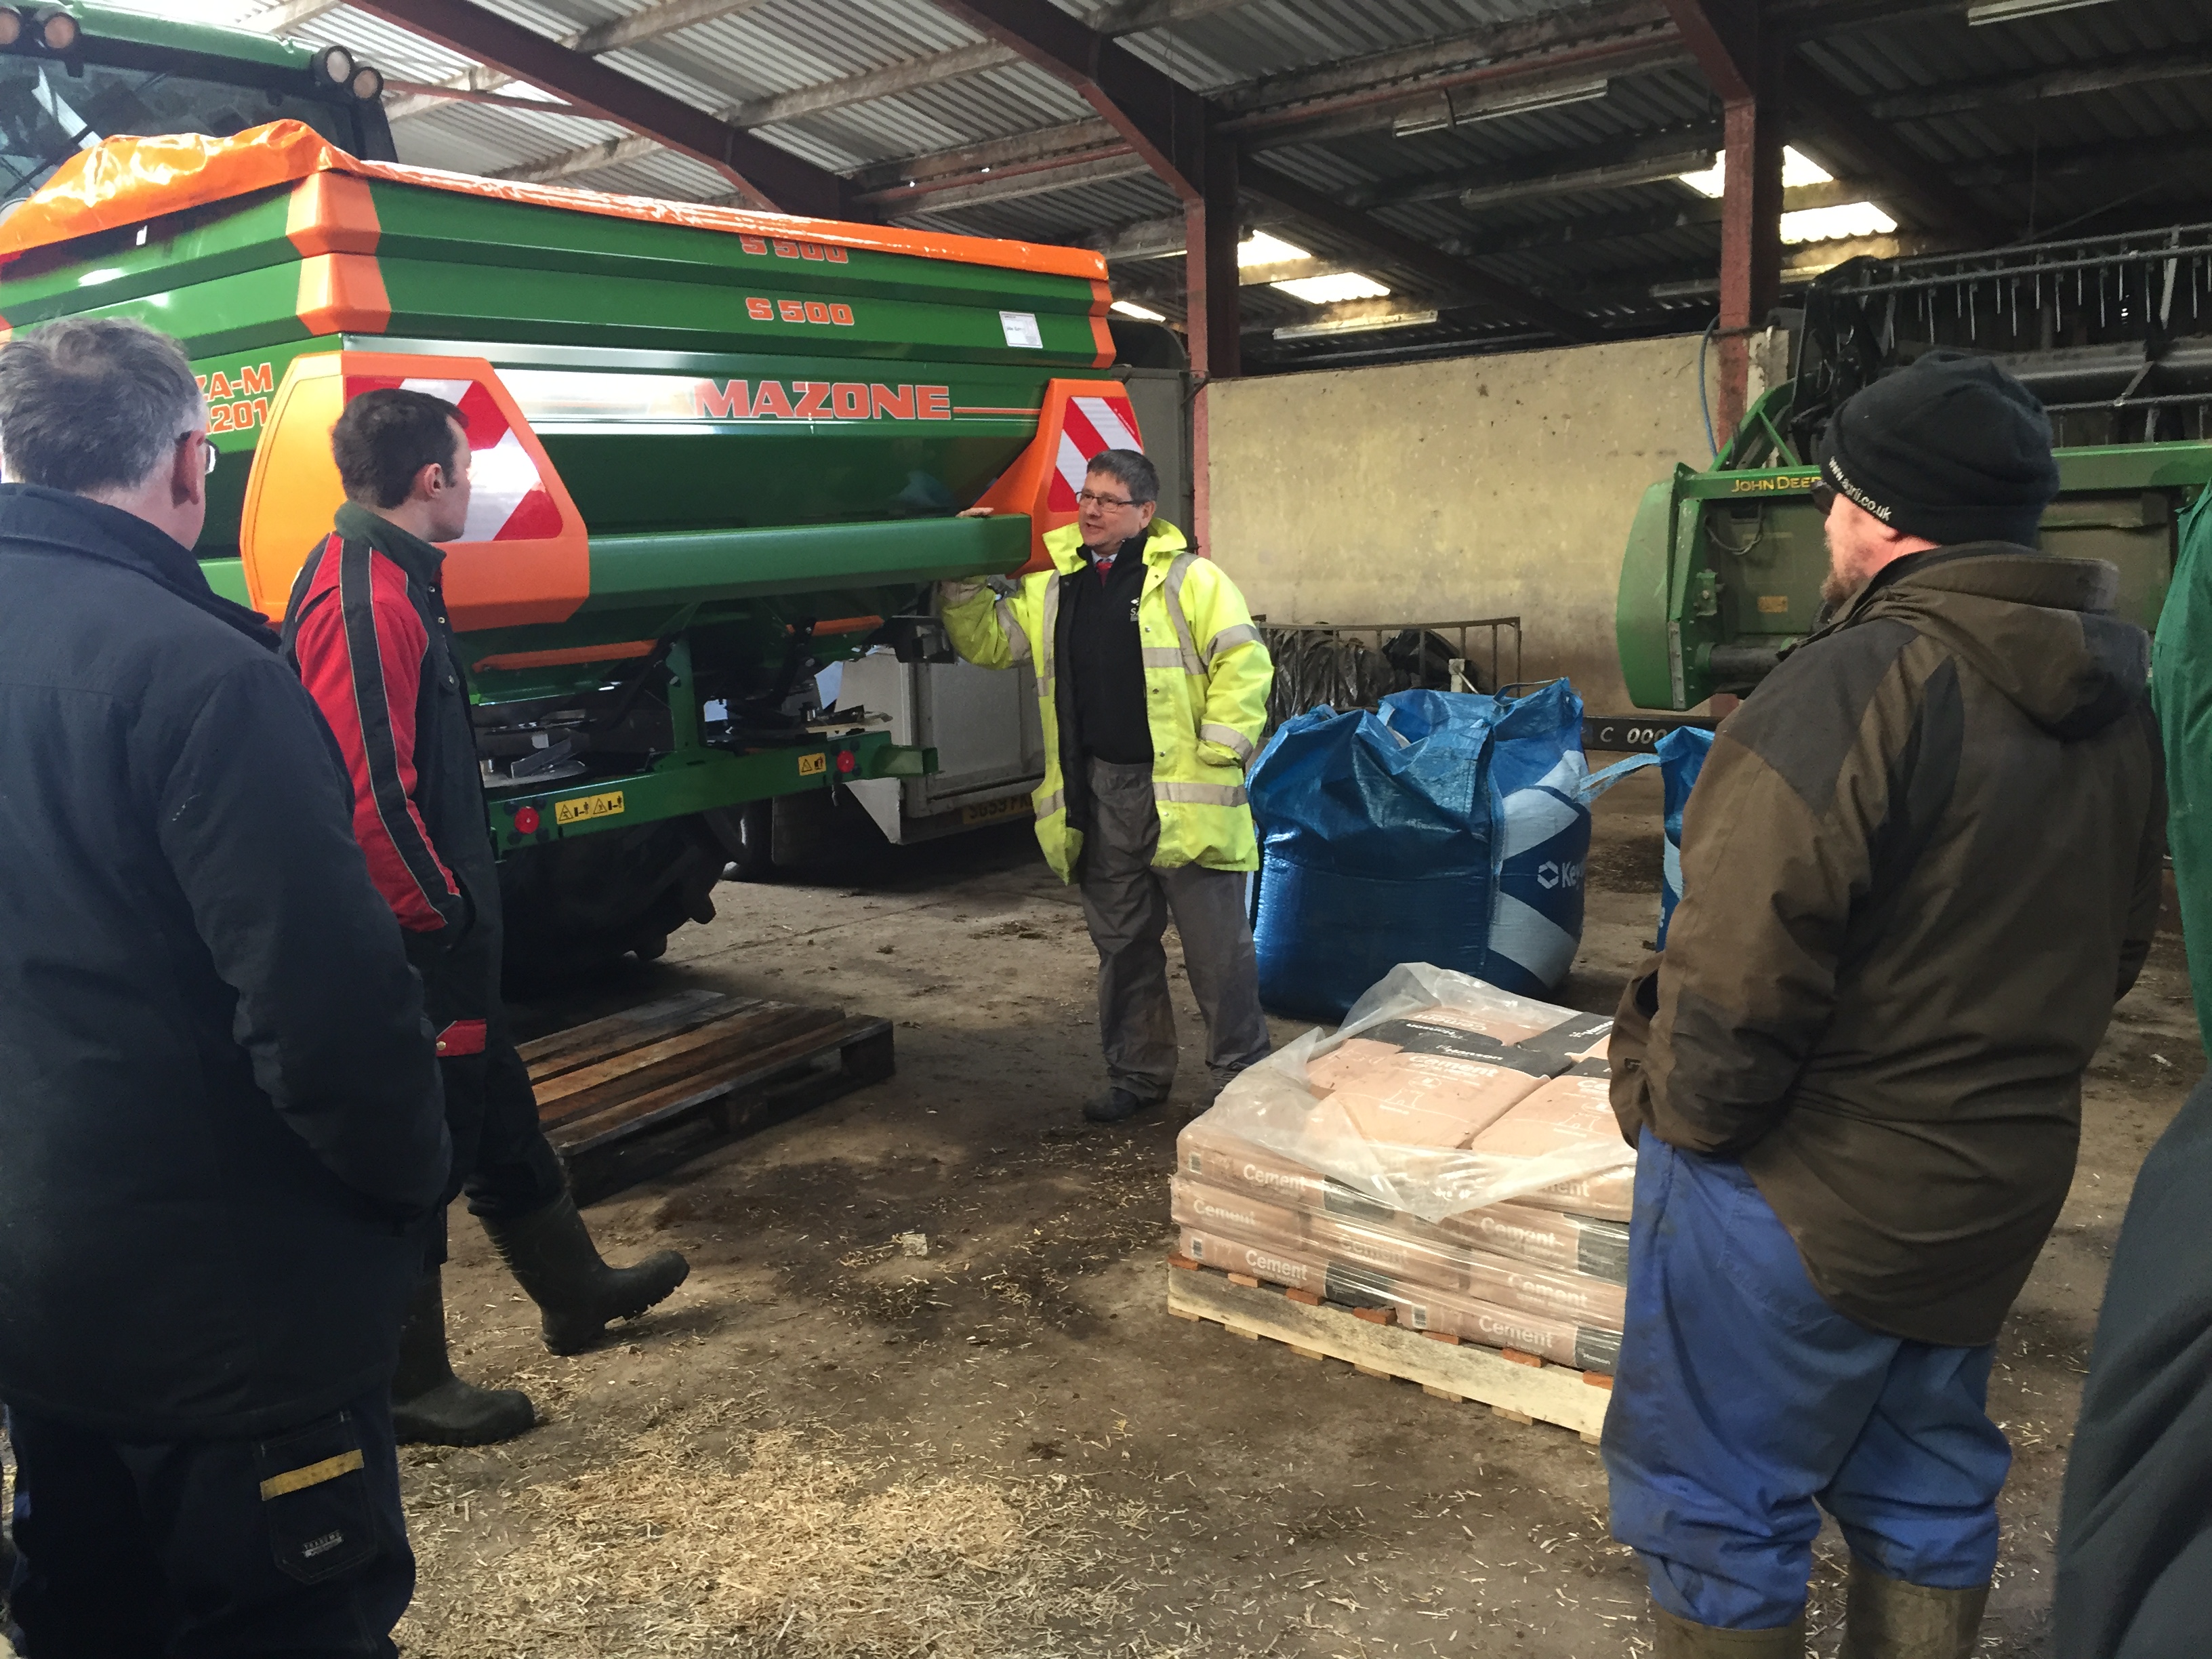 Gavin Elrick discussing the maintance of a fertiliser spreader and N, P & K requirements during the recent West Lothian Soil & Nutrient Network event